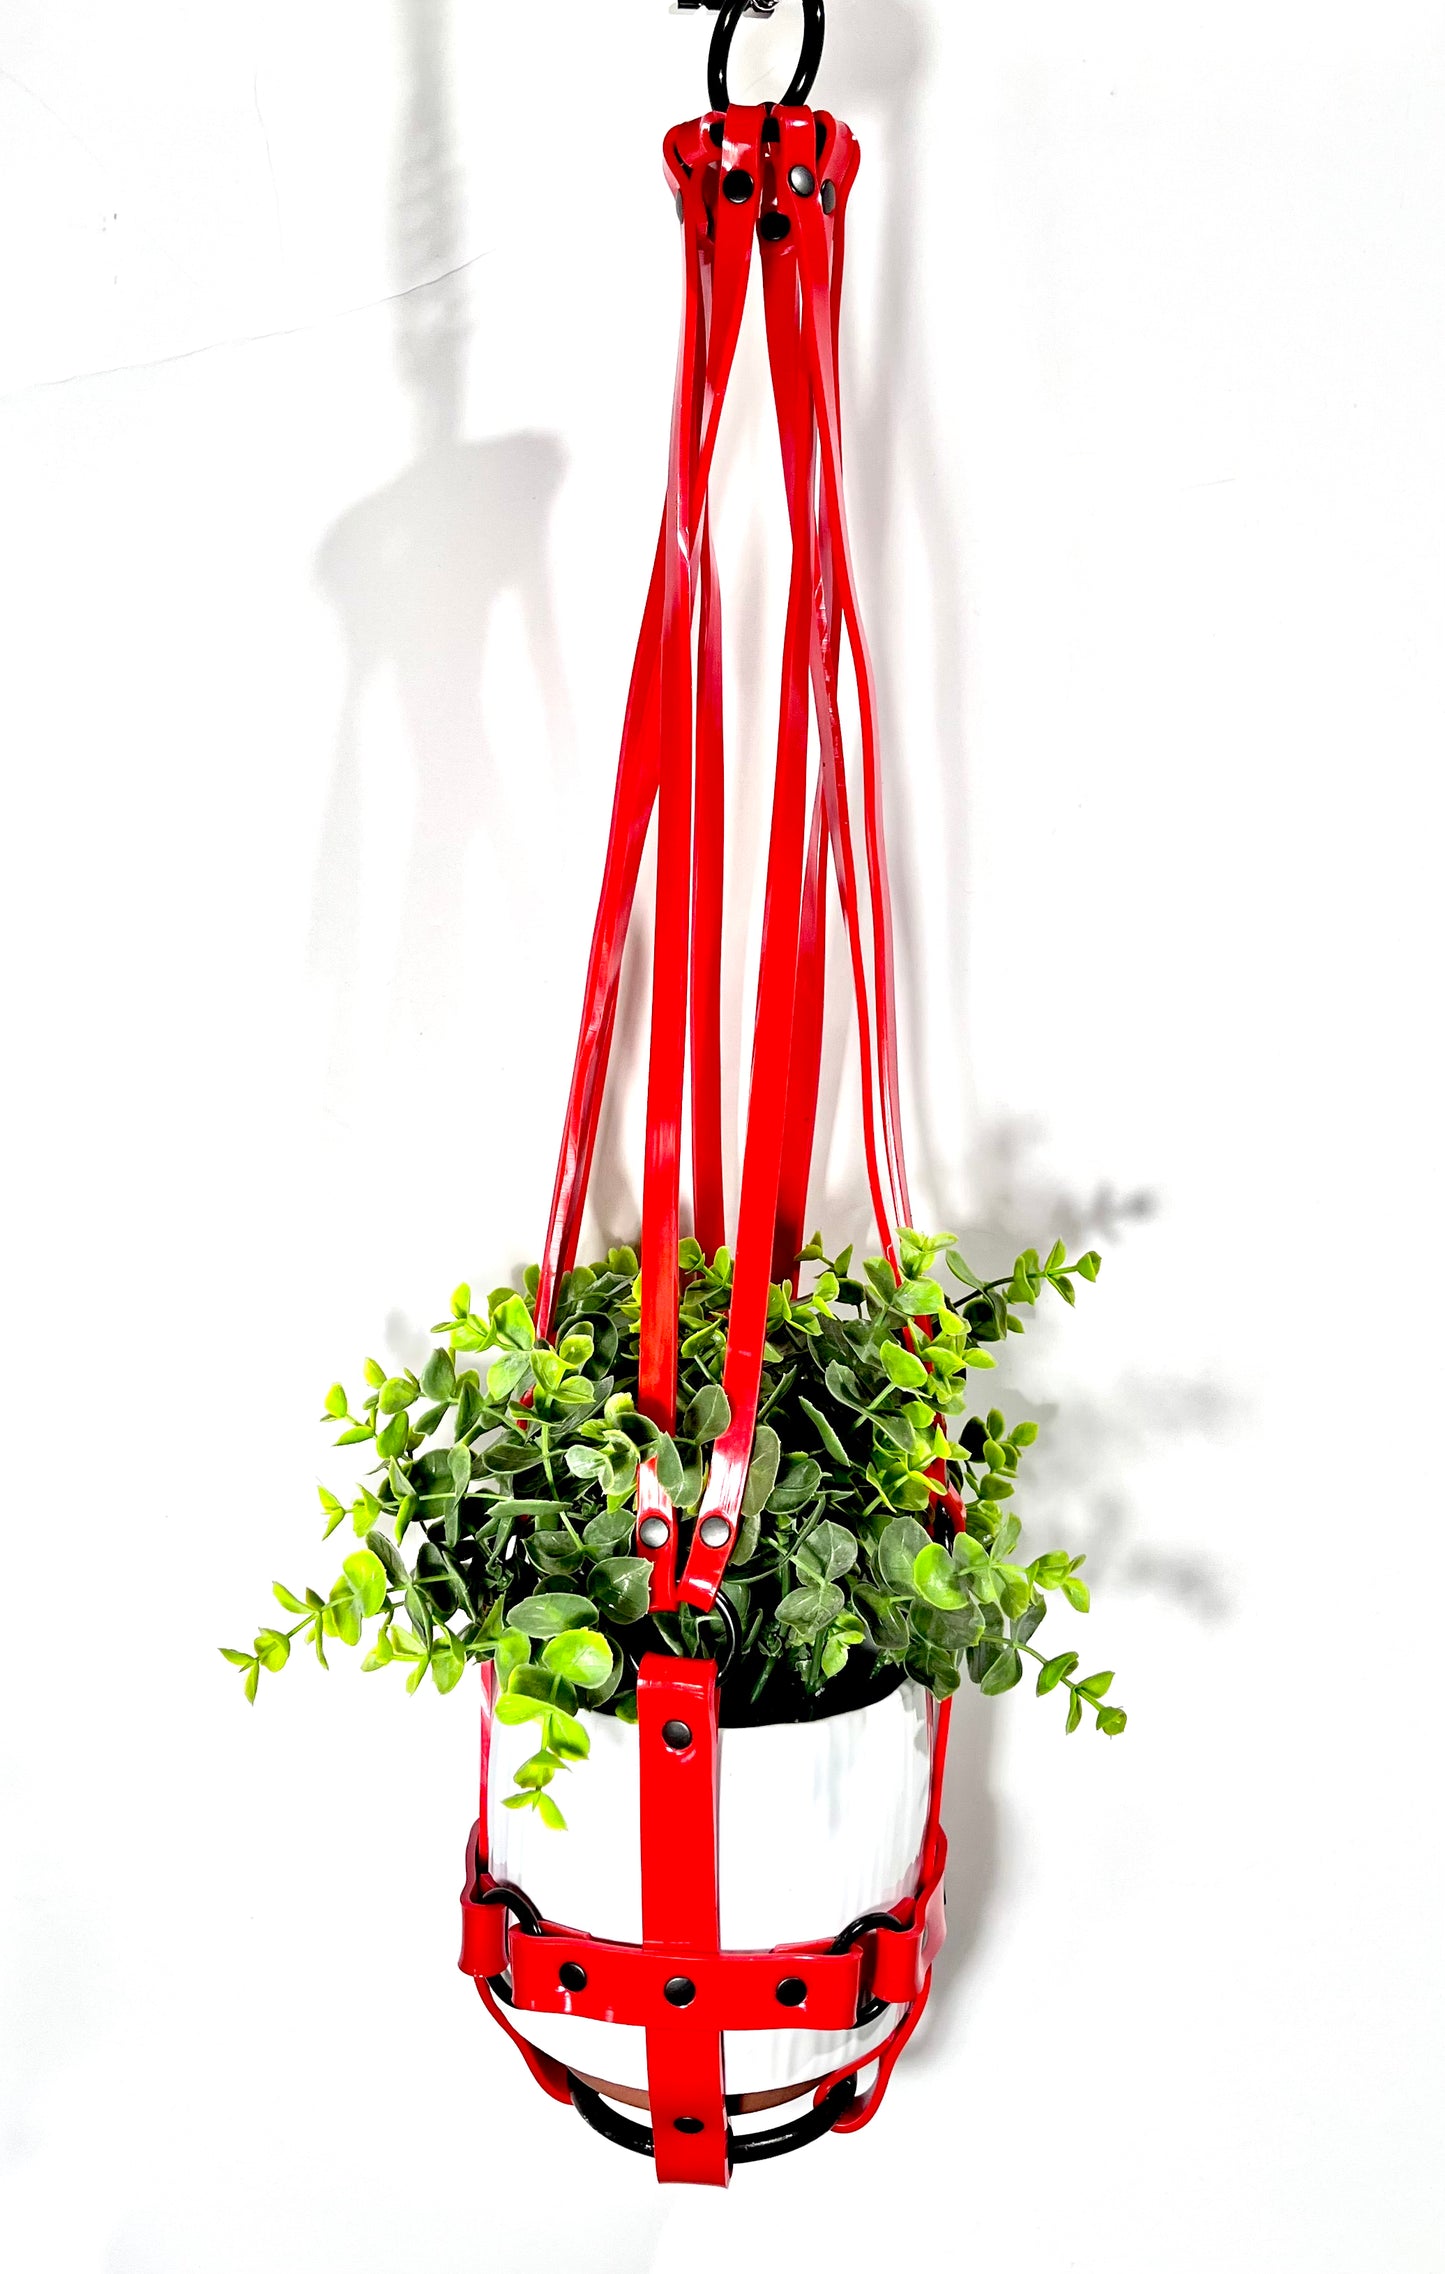 Basic Bitch 6" Plant Hanger in Red